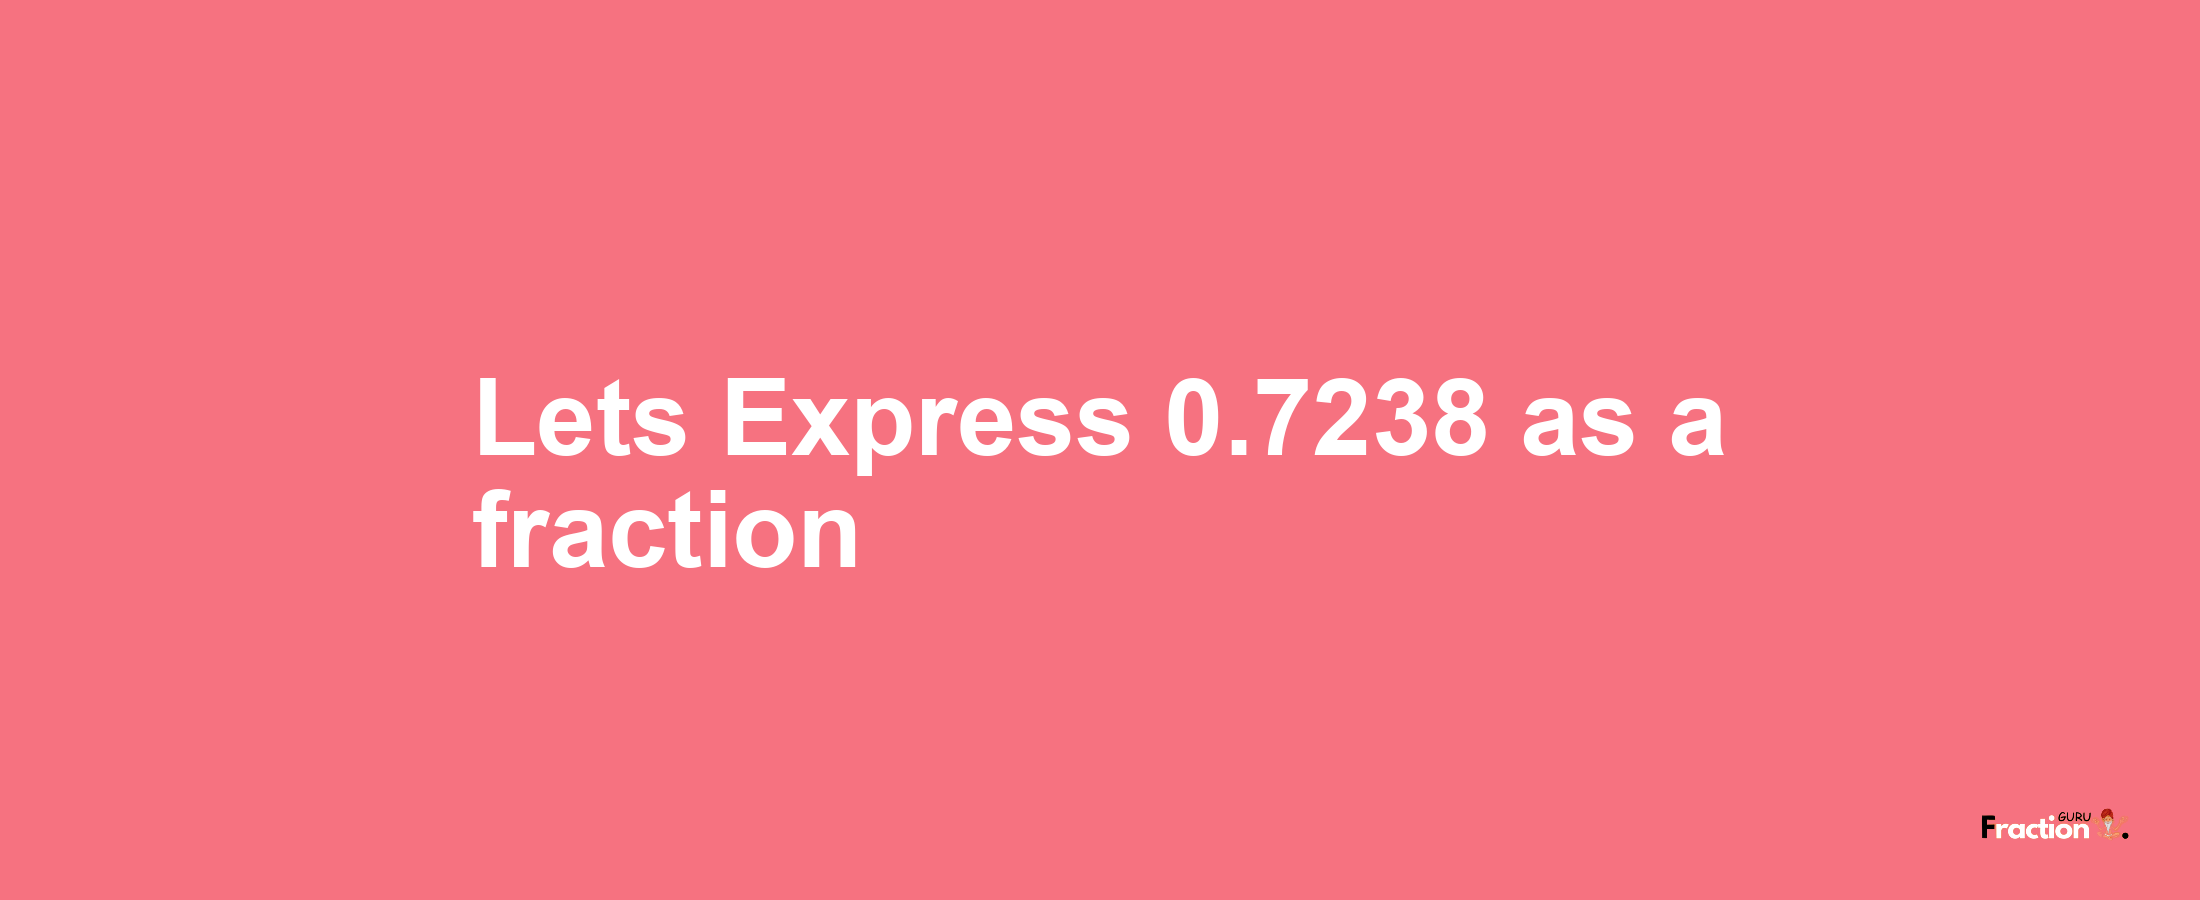 Lets Express 0.7238 as afraction